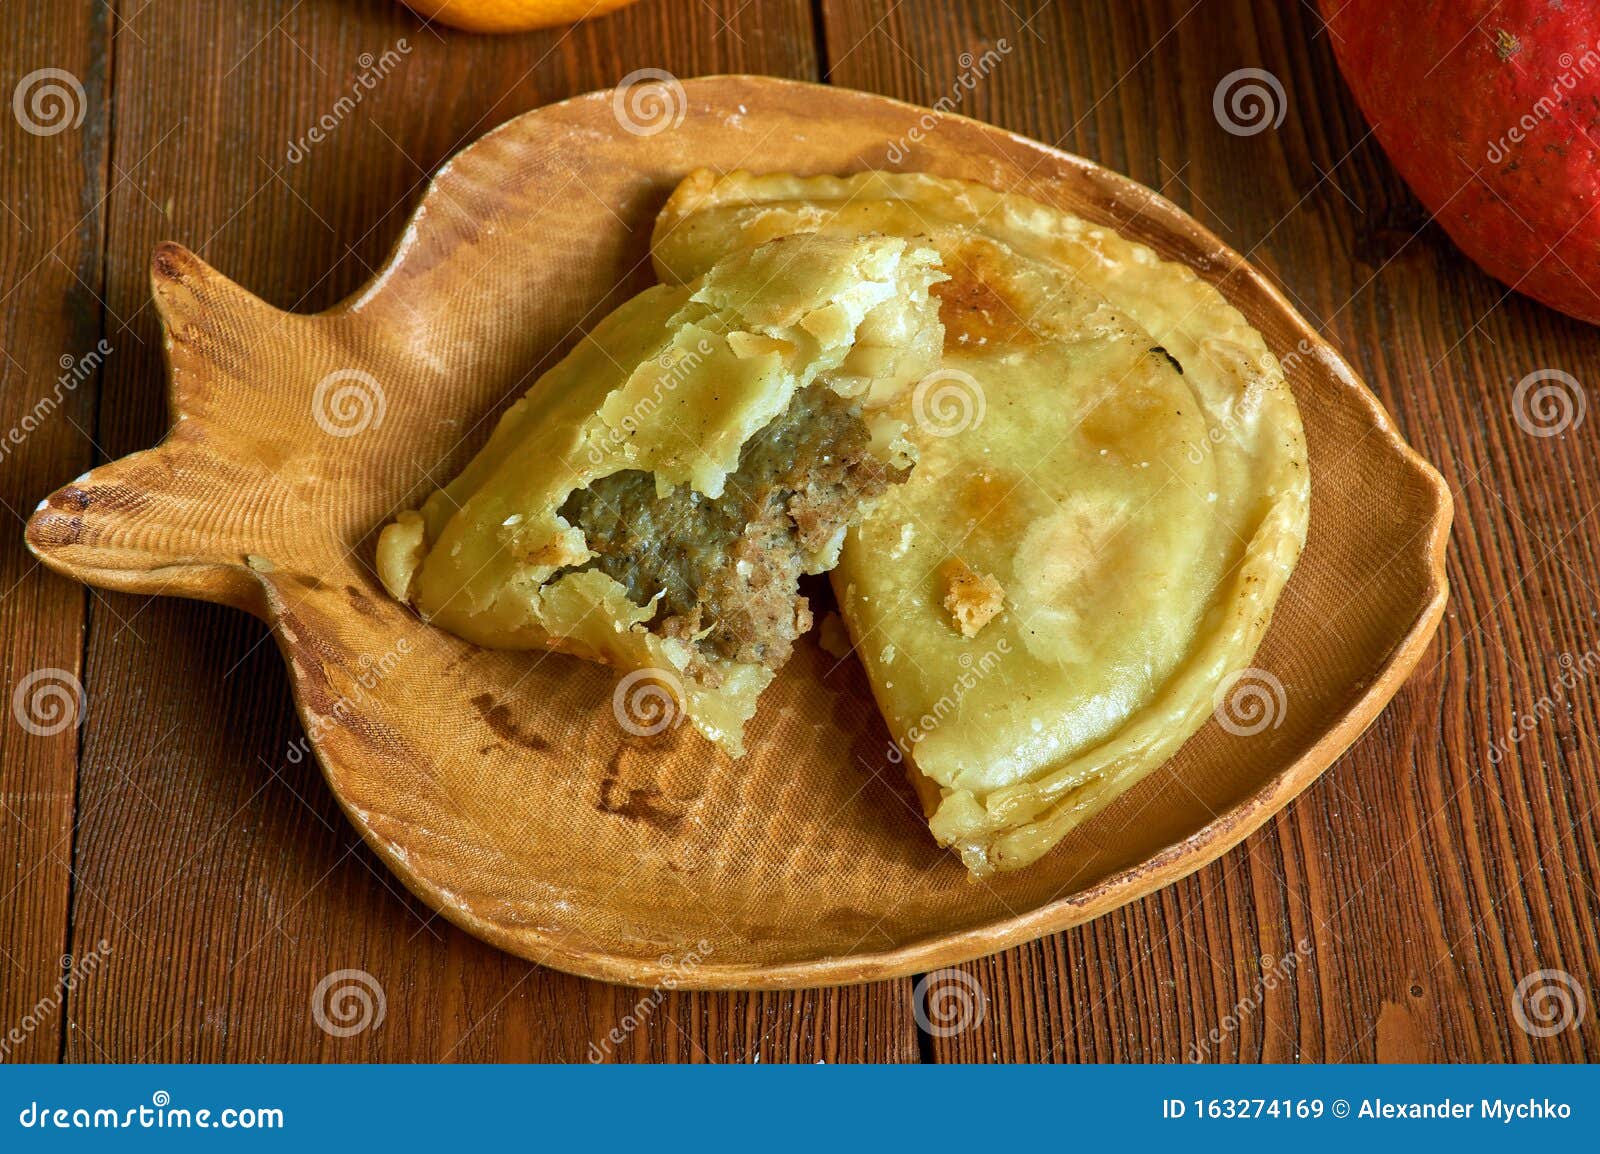 cameroonian meat pie